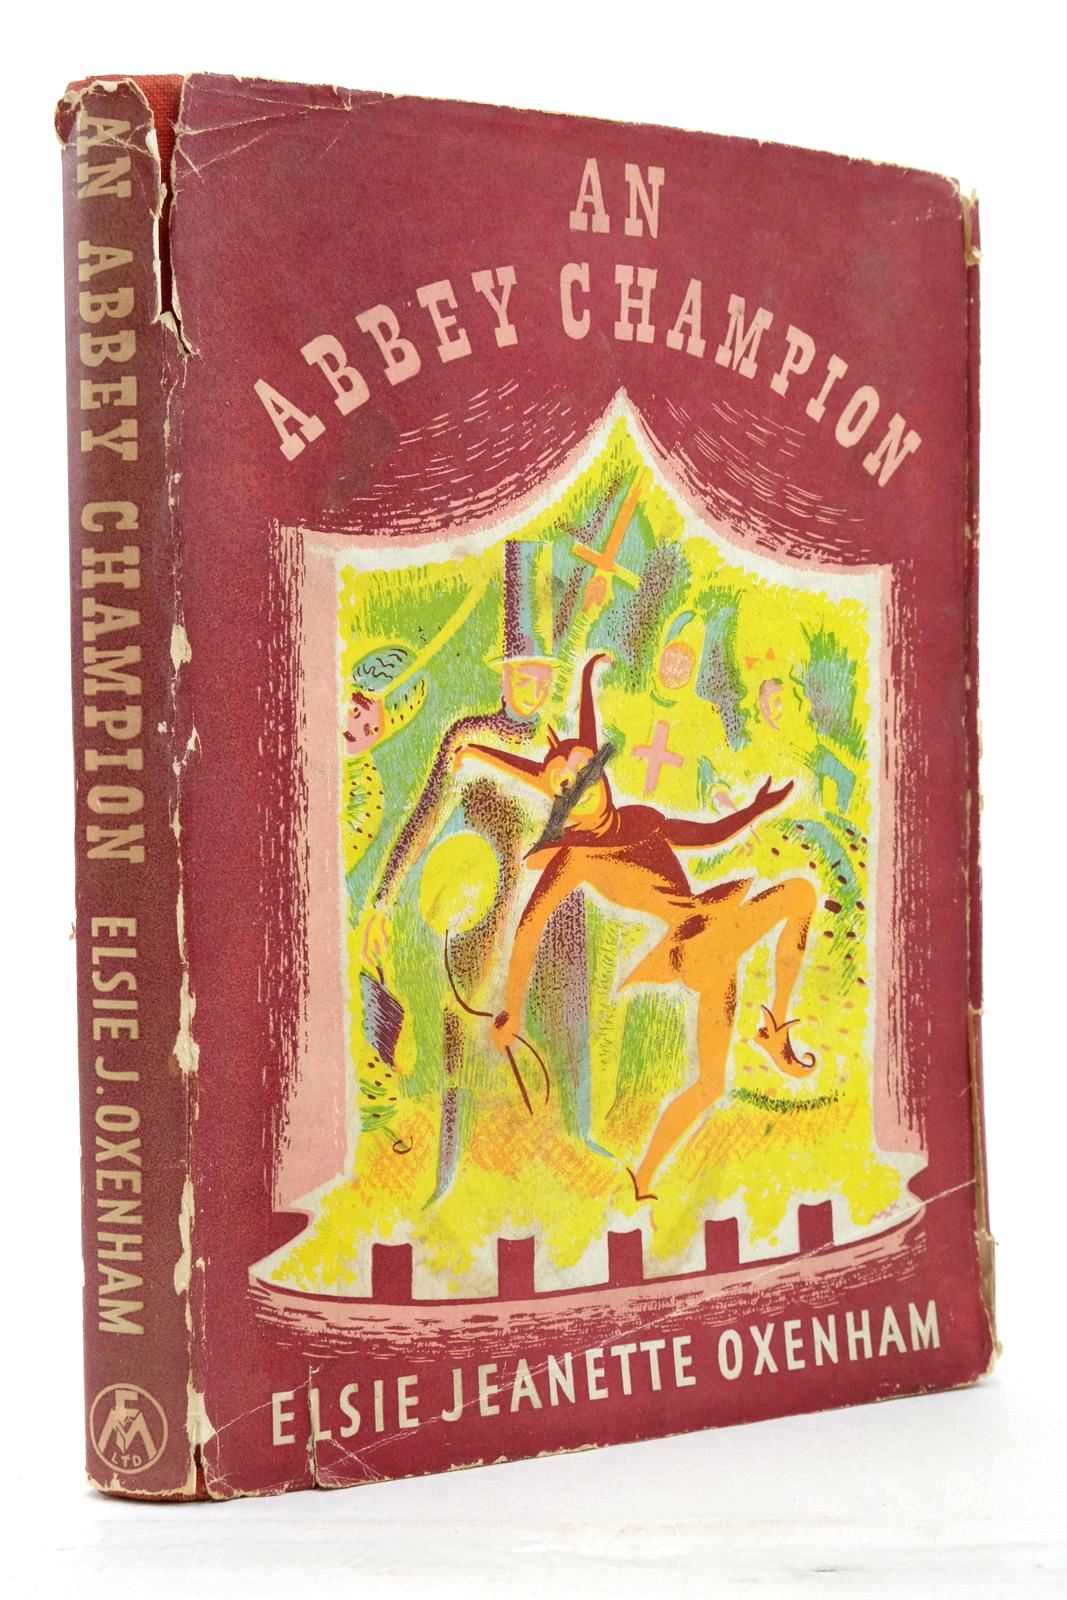 Photo of AN ABBEY CHAMPION written by Oxenham, Elsie J. illustrated by Horder, Margaret published by Frederick Muller Ltd. (STOCK CODE: 2137920)  for sale by Stella & Rose's Books